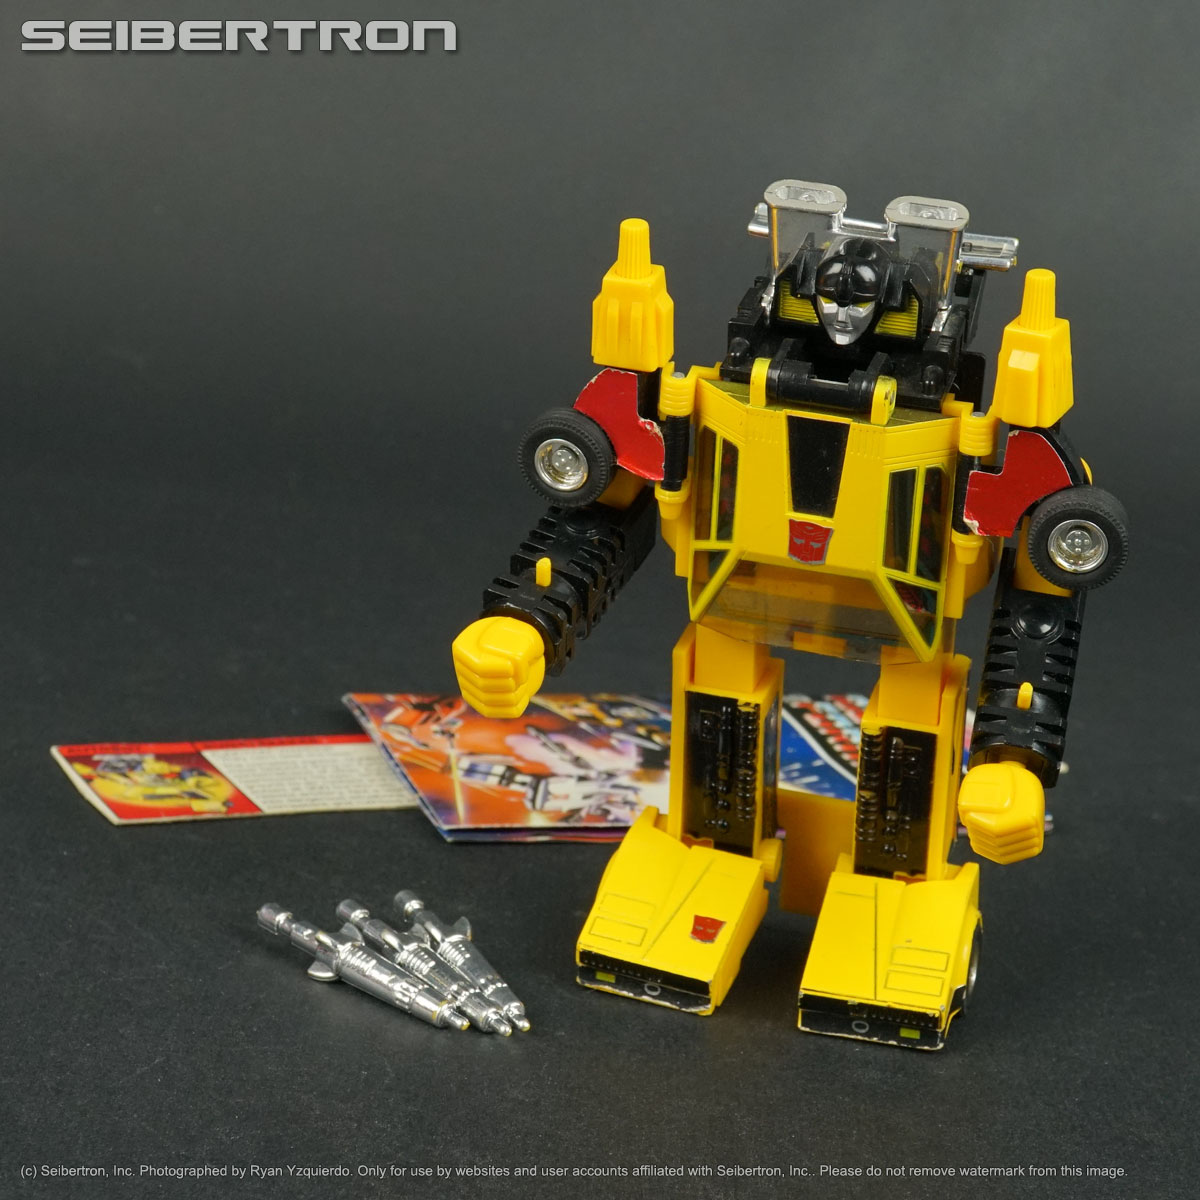 SUNSTREAKER Transformers G1 Autobot Cars complete + more Hasbro 1984 220807A